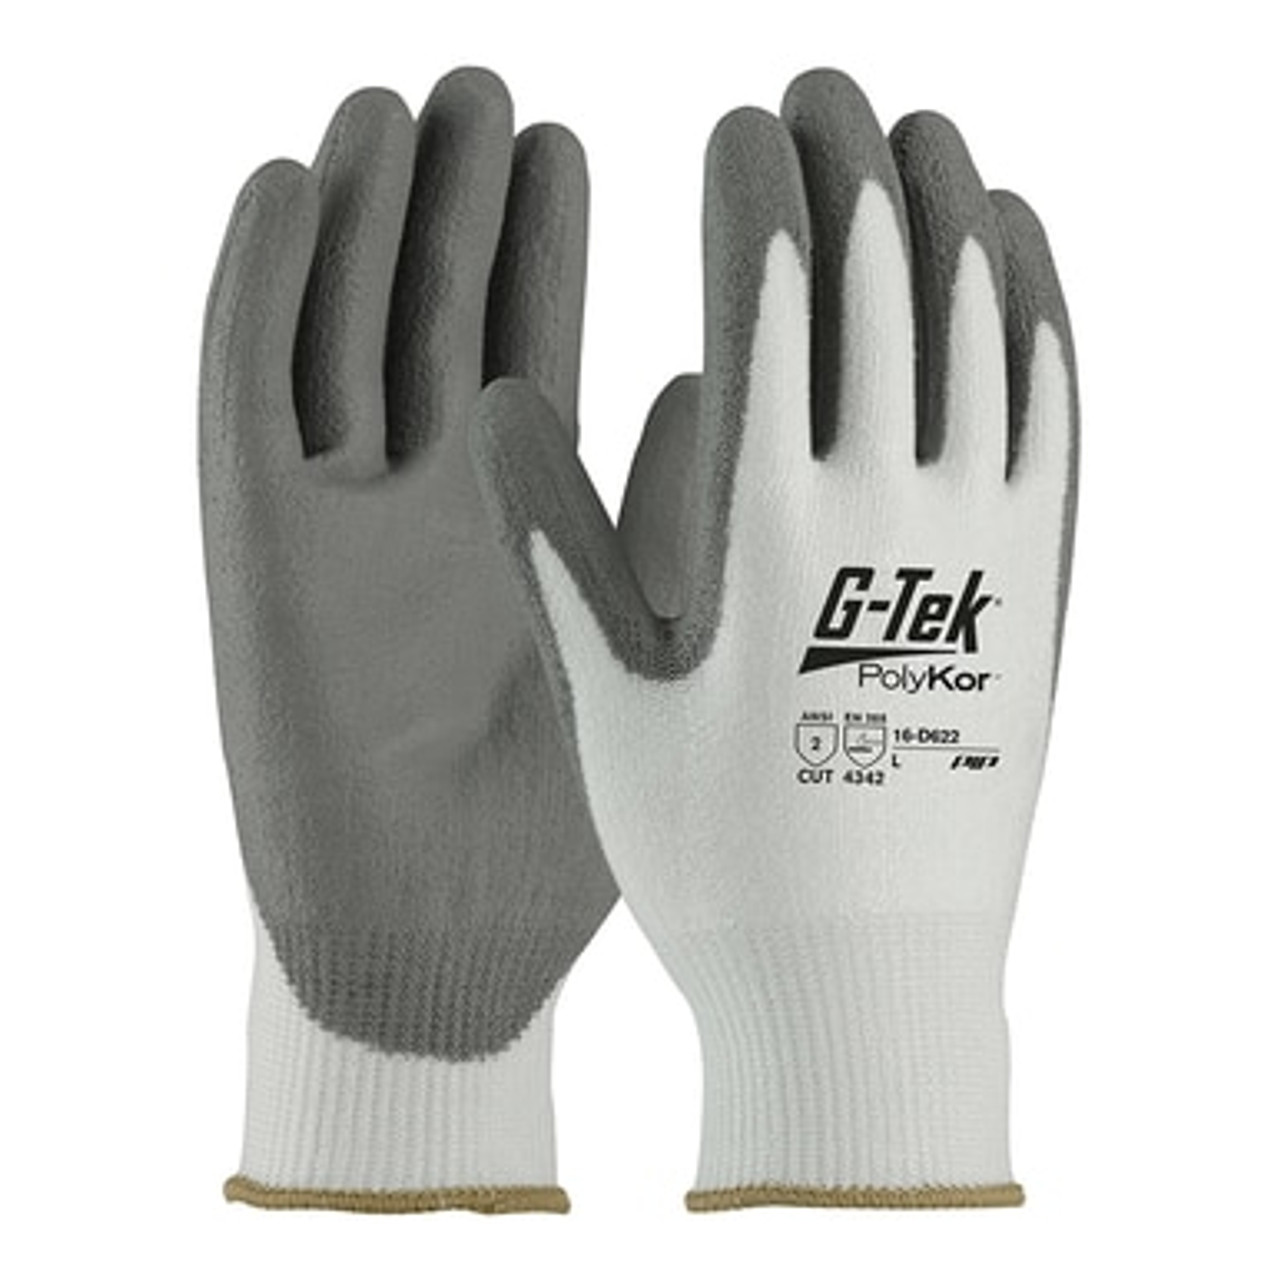 ANSI Level 3 Cut-Resistant Nitrile Coated Work Gloves - Medium, 1 Dozen -  Industrial and Personal Safety Products from